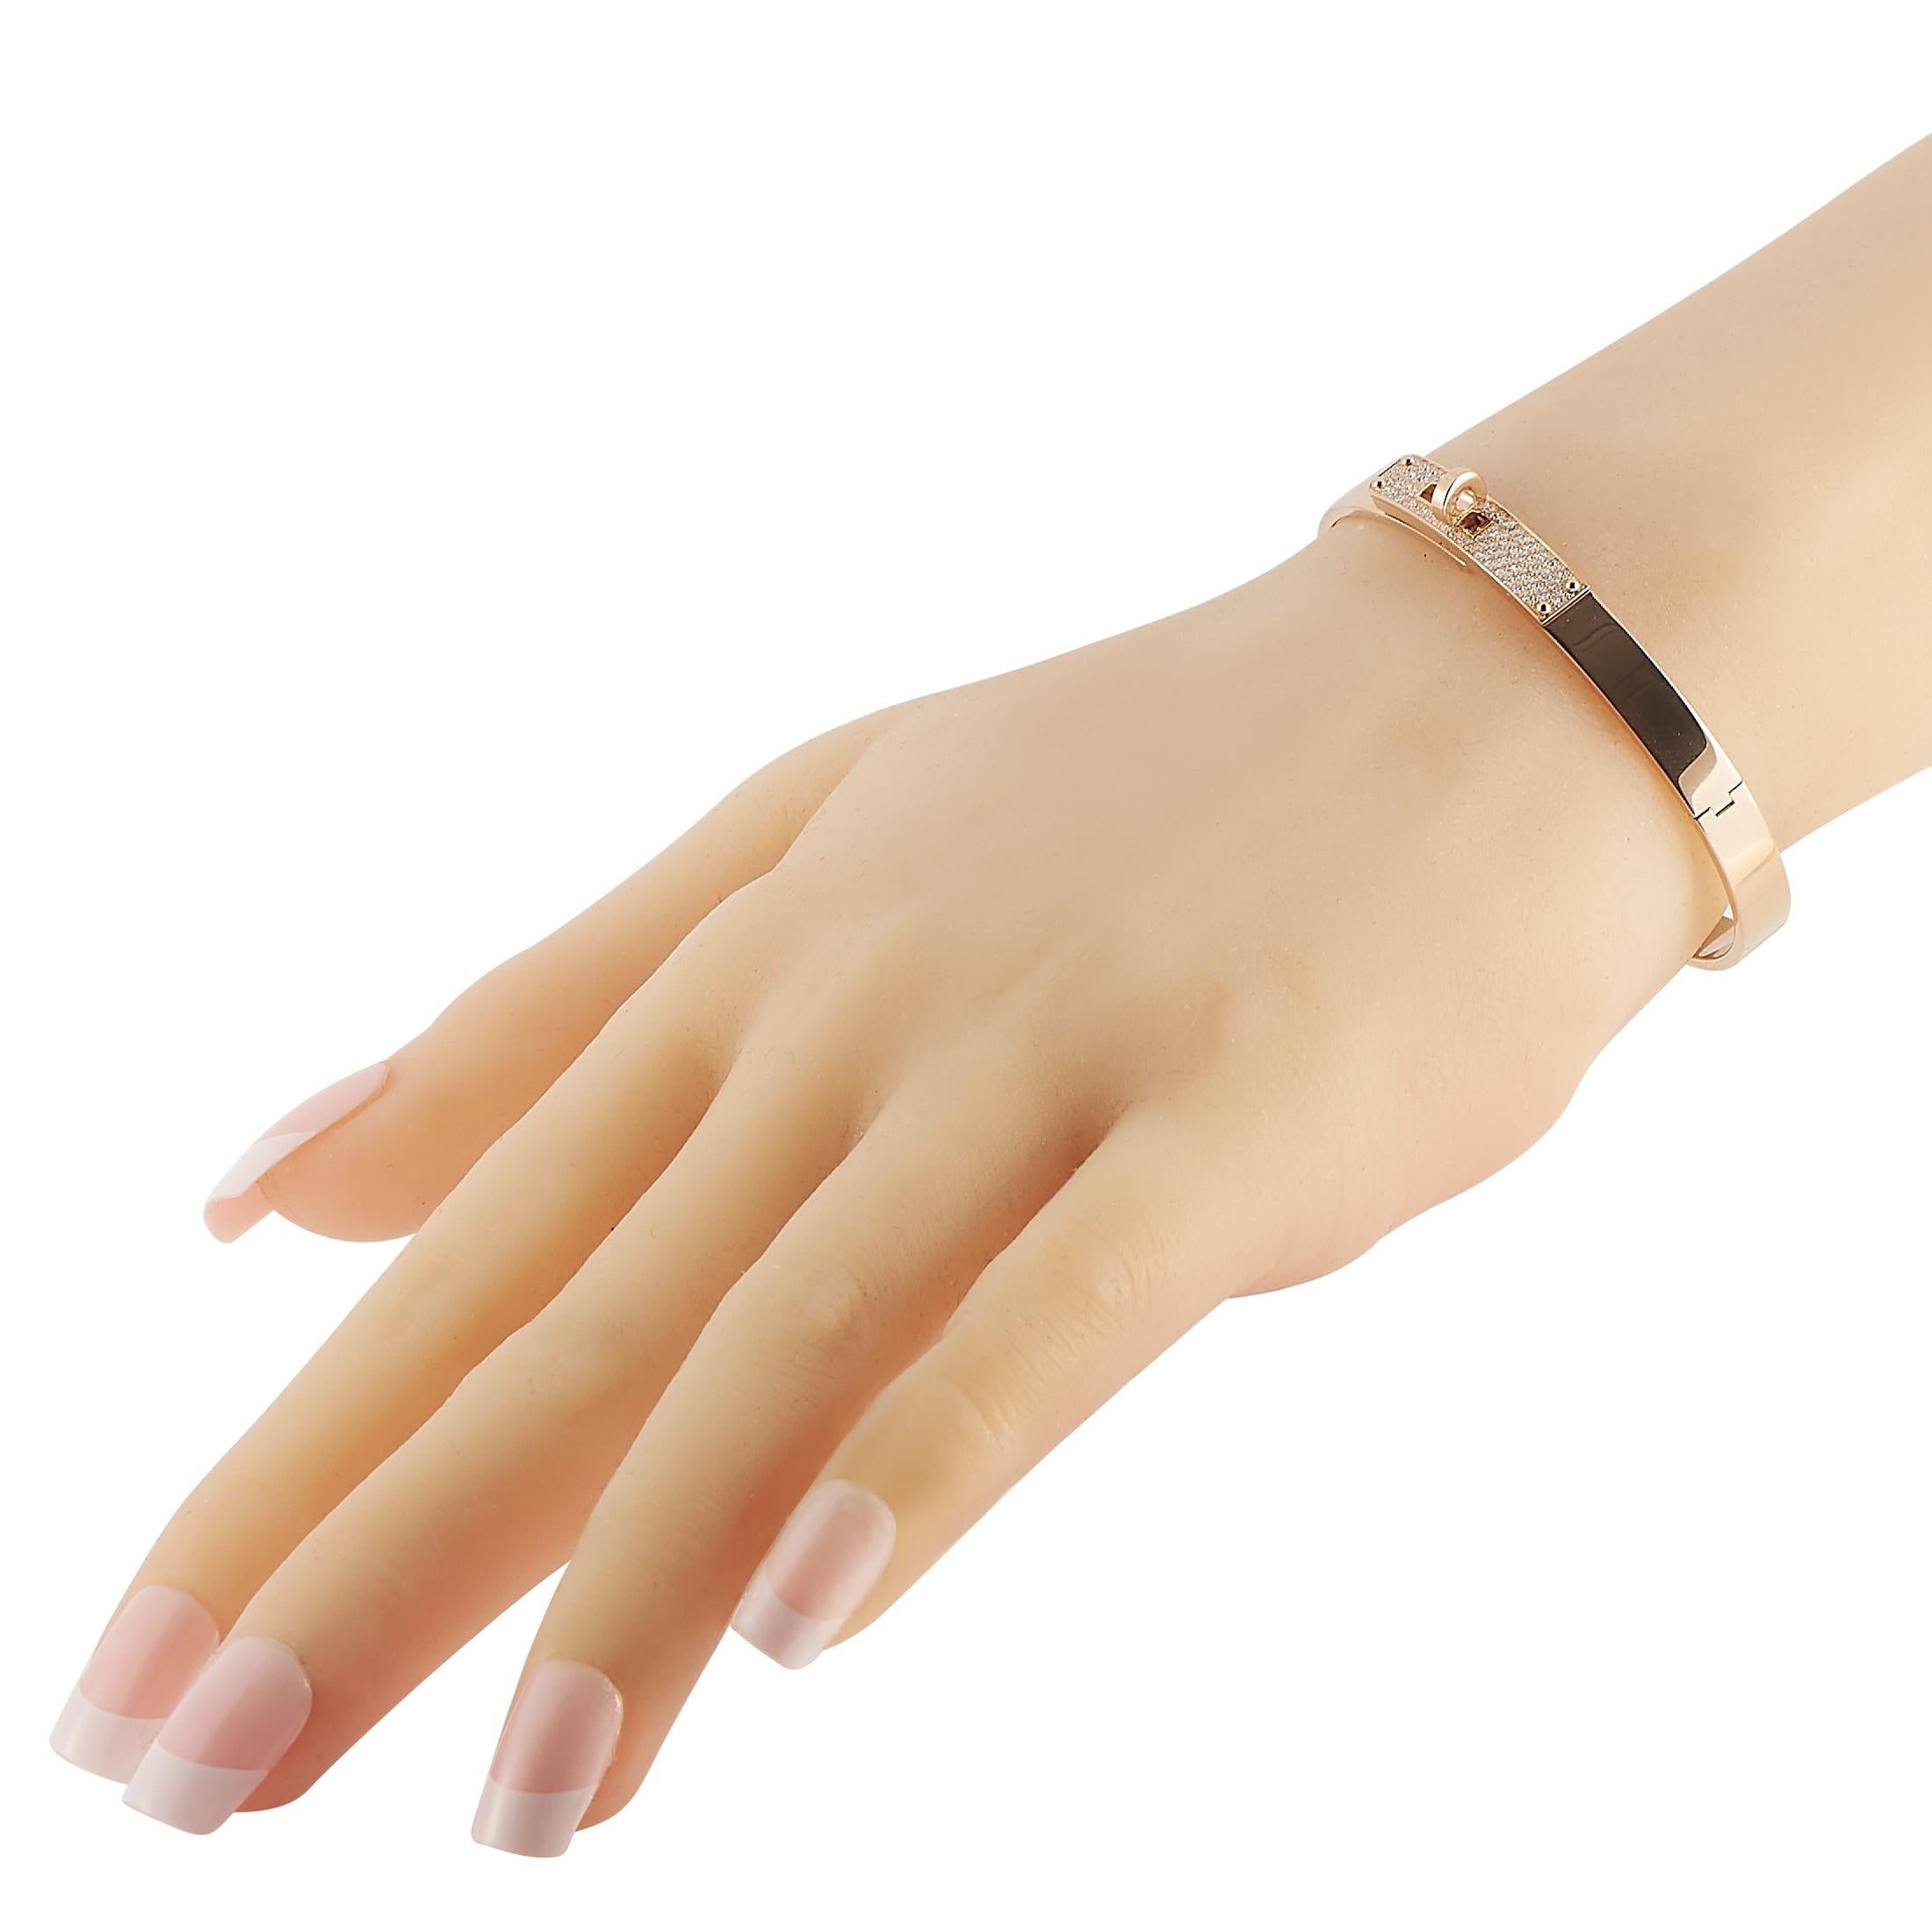 This Hermès Kelly Bangle is an instantly recognizable piece with an iconic sense of style. Measuring 7” long, this exquisite accent piece pairs opulent 18K Rose Gold with inset diamonds totaling 0.33 carats. 
 
 This jewelry piece is offered in